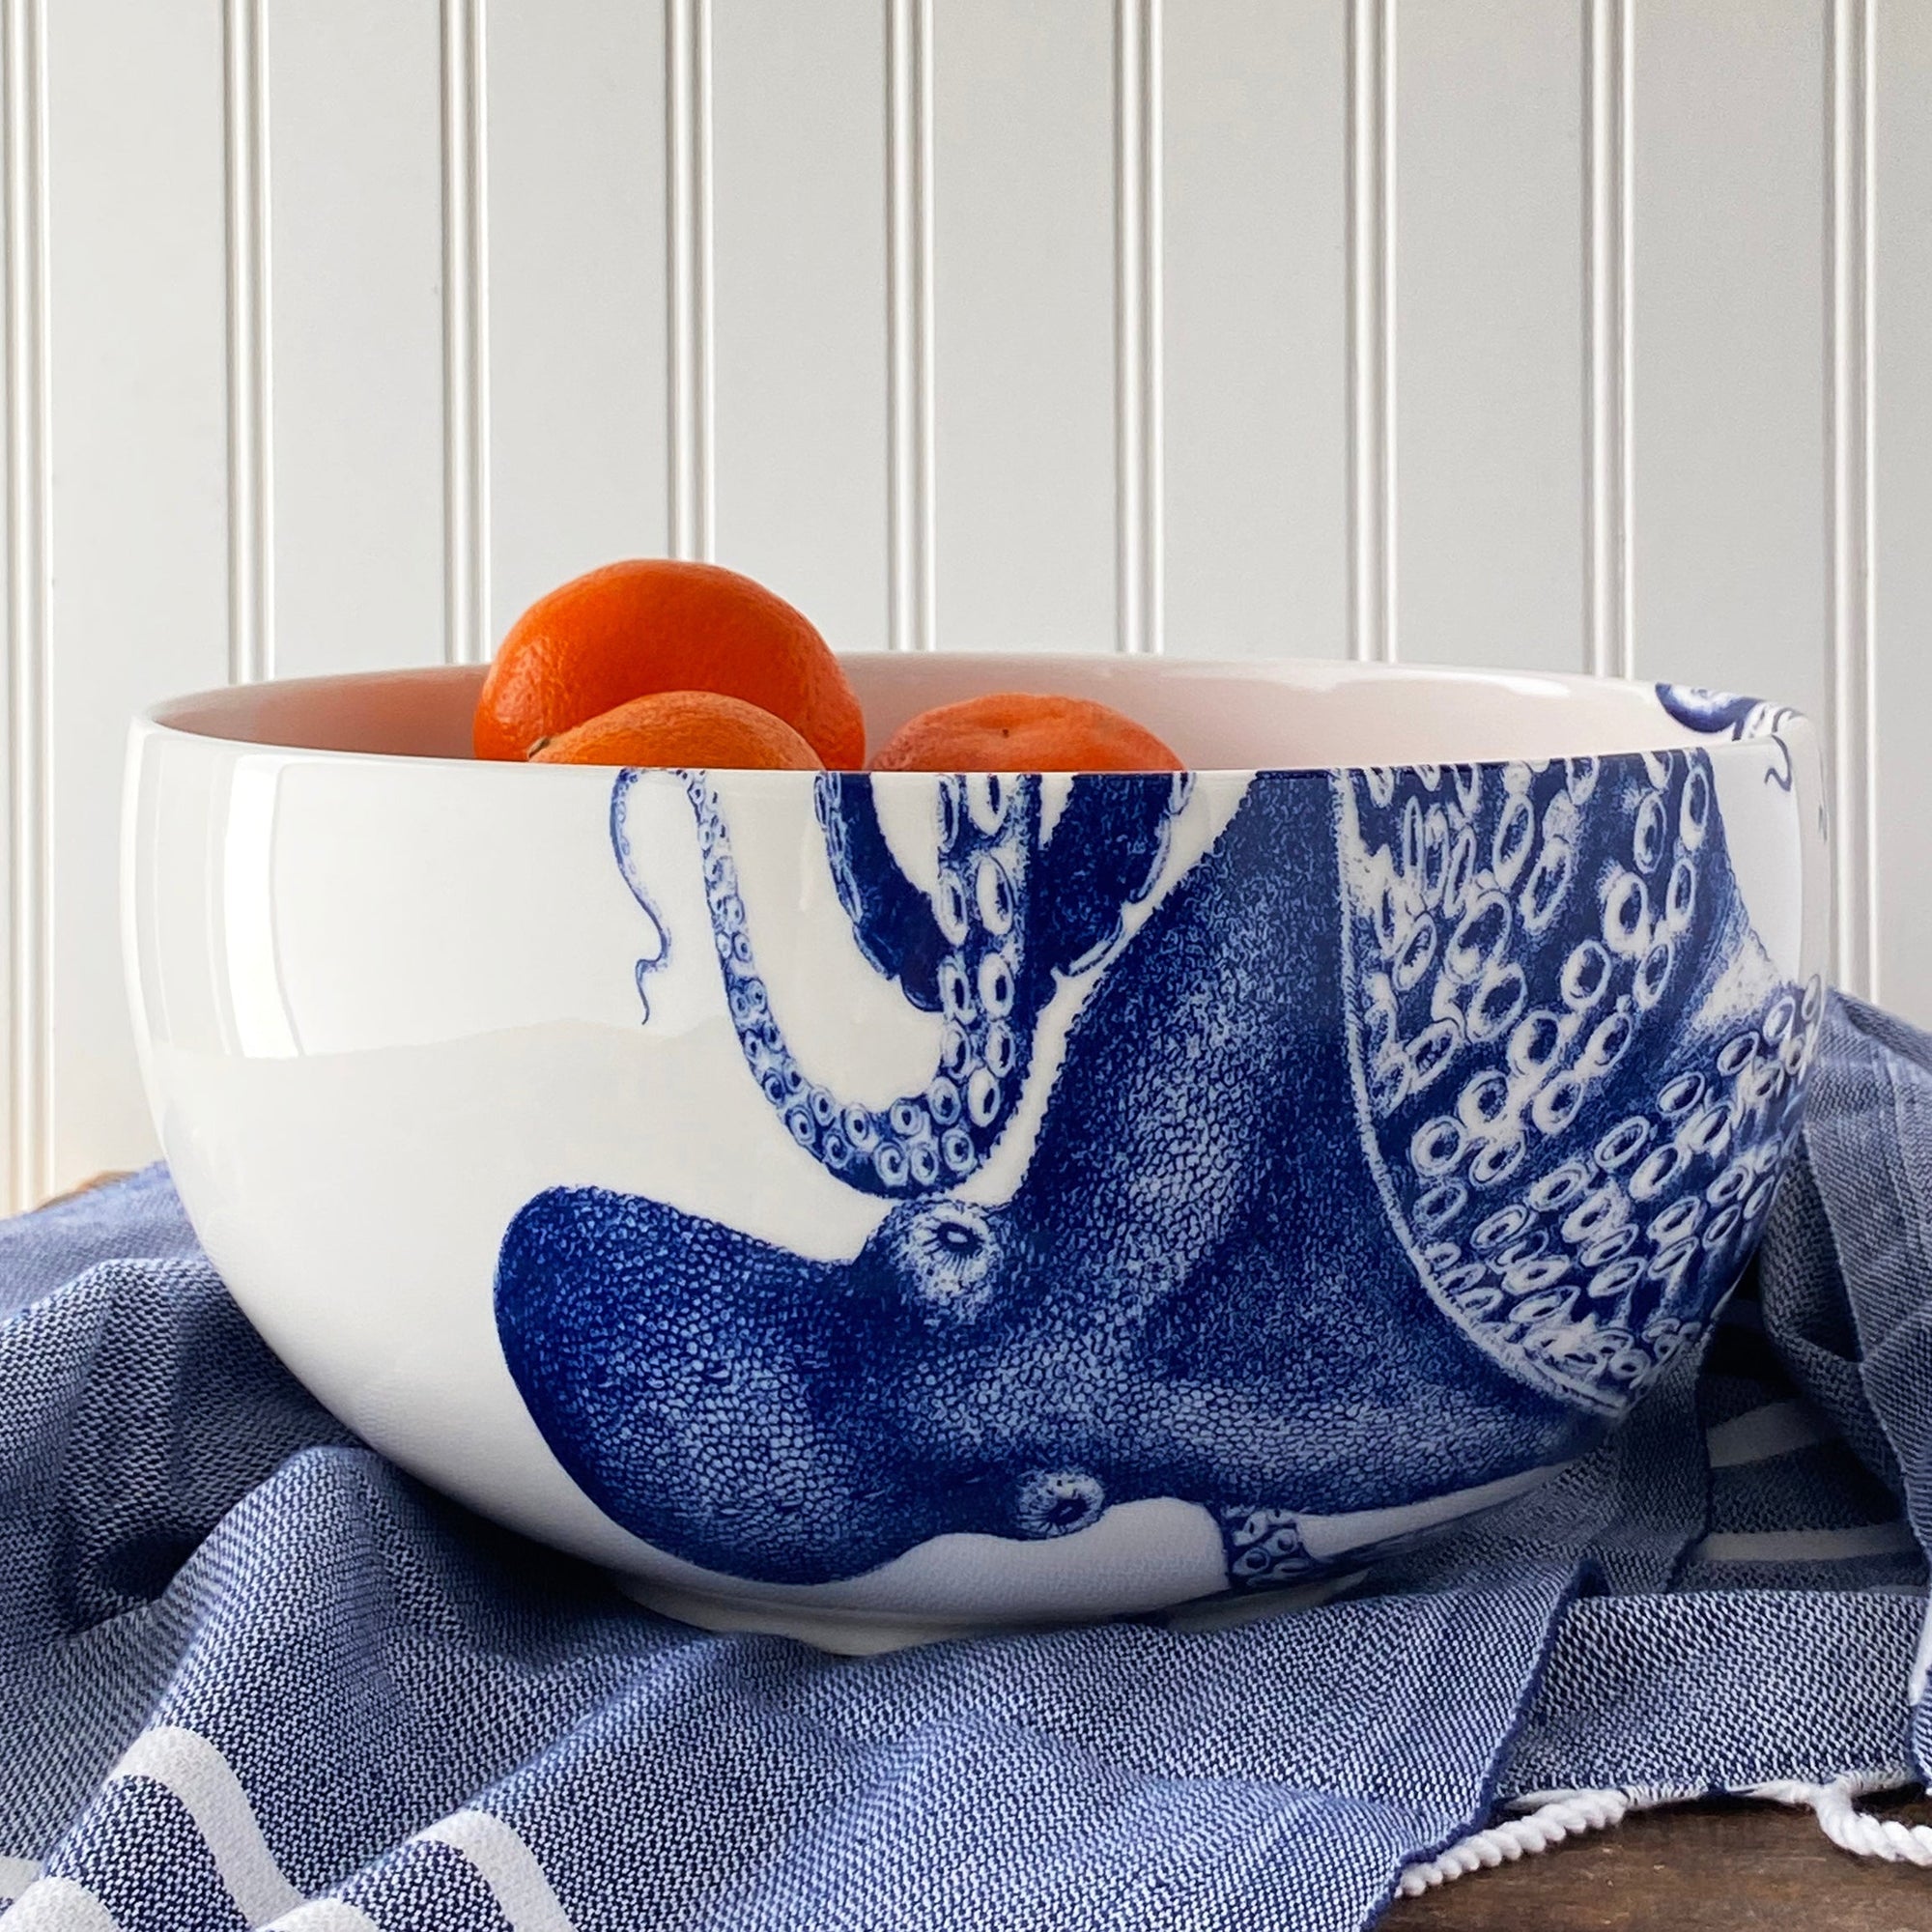 A blue and white porcelain Lucy Large Round Serving Bowl with an octopus signature motif from Caskata Artisanal Home.